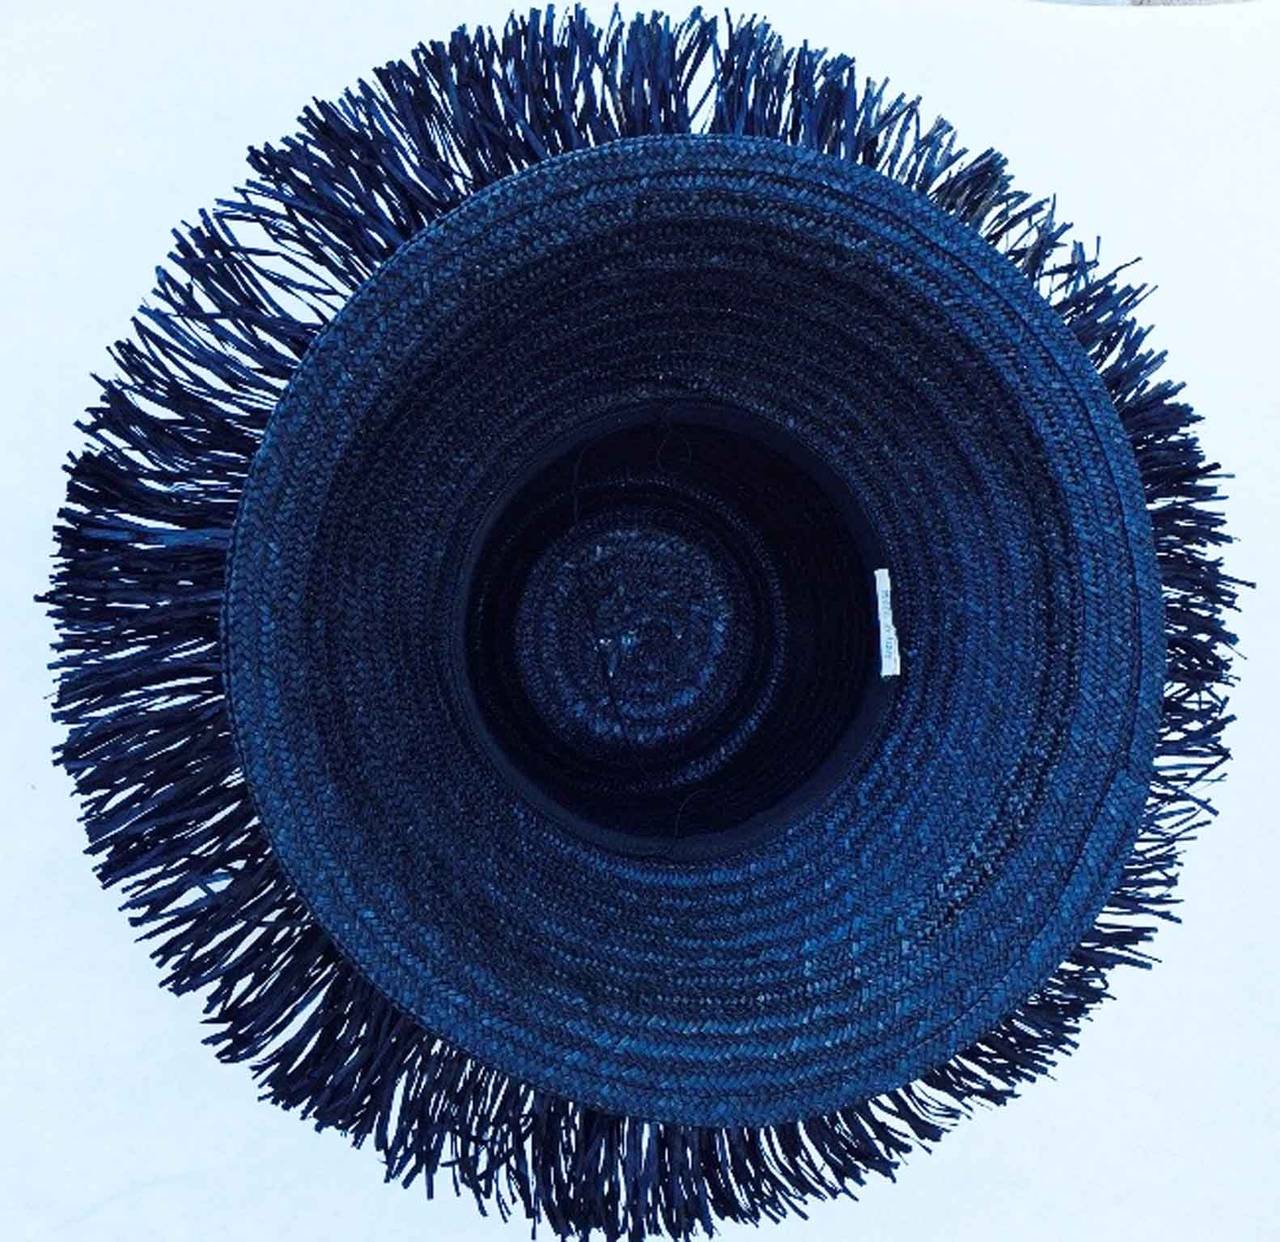 A fine vintage Italian straw beach hat. Black woven raffia straw item features a wide shiny paillettes fringed brim. One size all item. Pristine appears unworn.